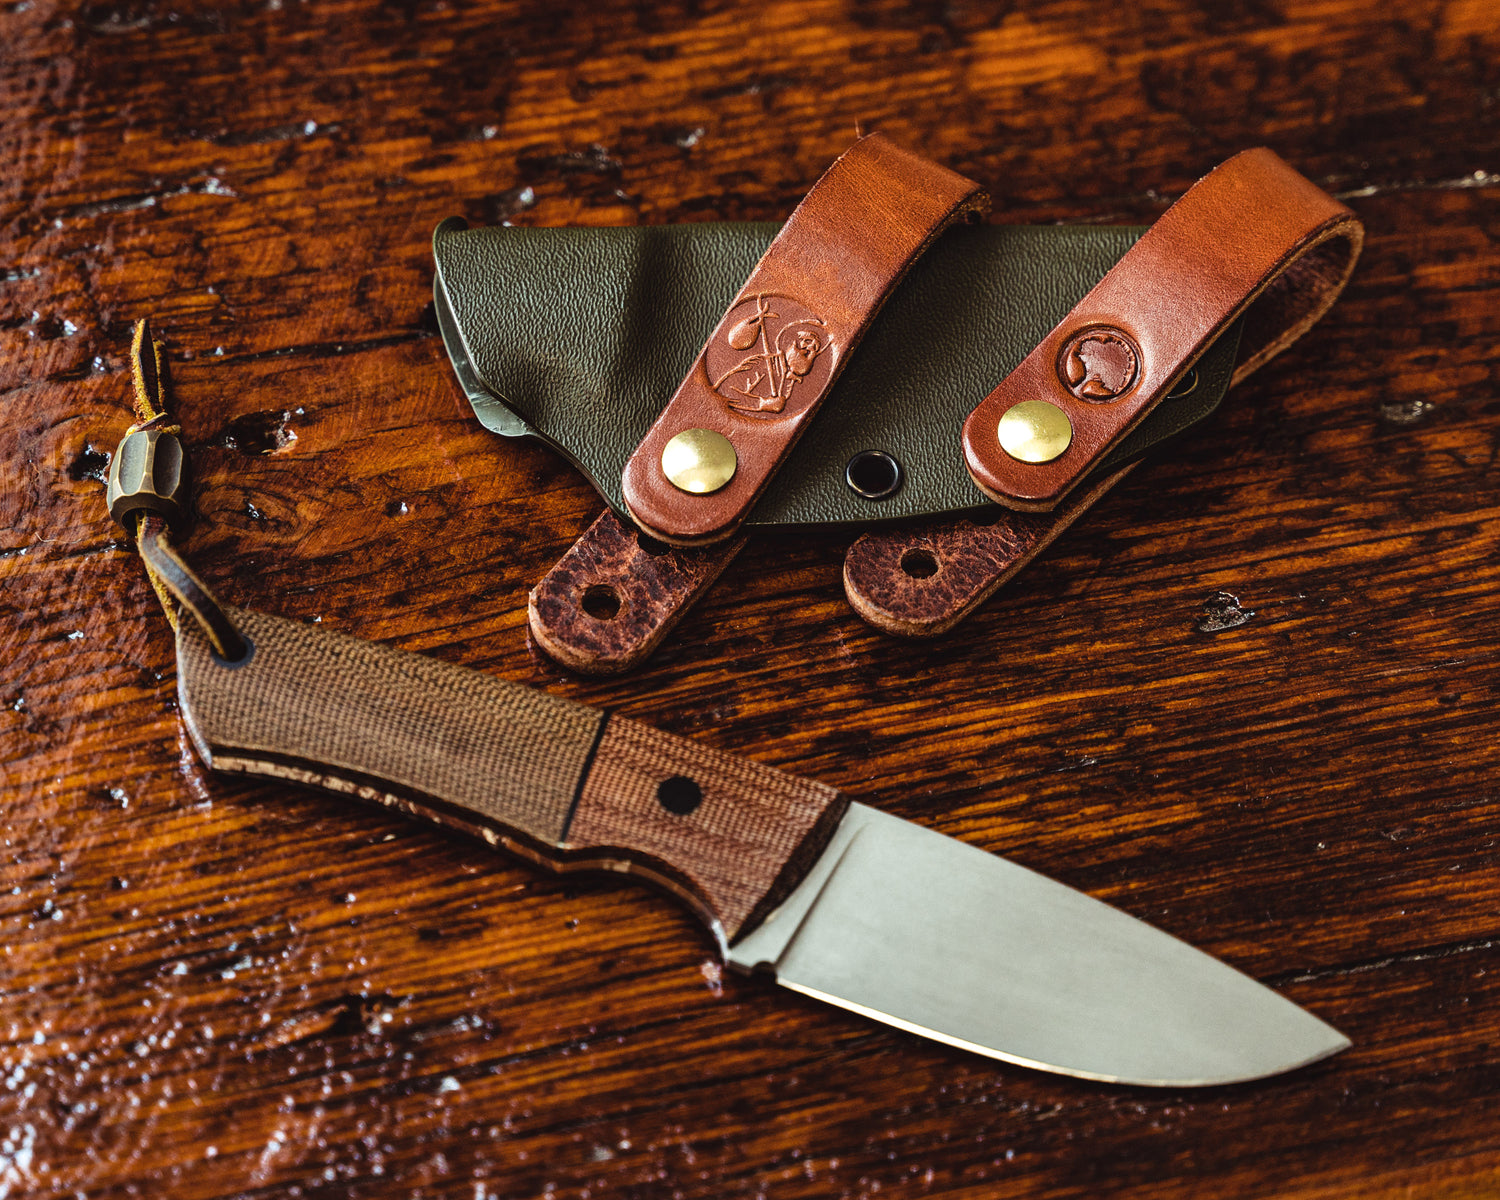 Carry Commission / Redeemed Creations Scout Straps attached to knife sheath with knife overhead view on wooden background